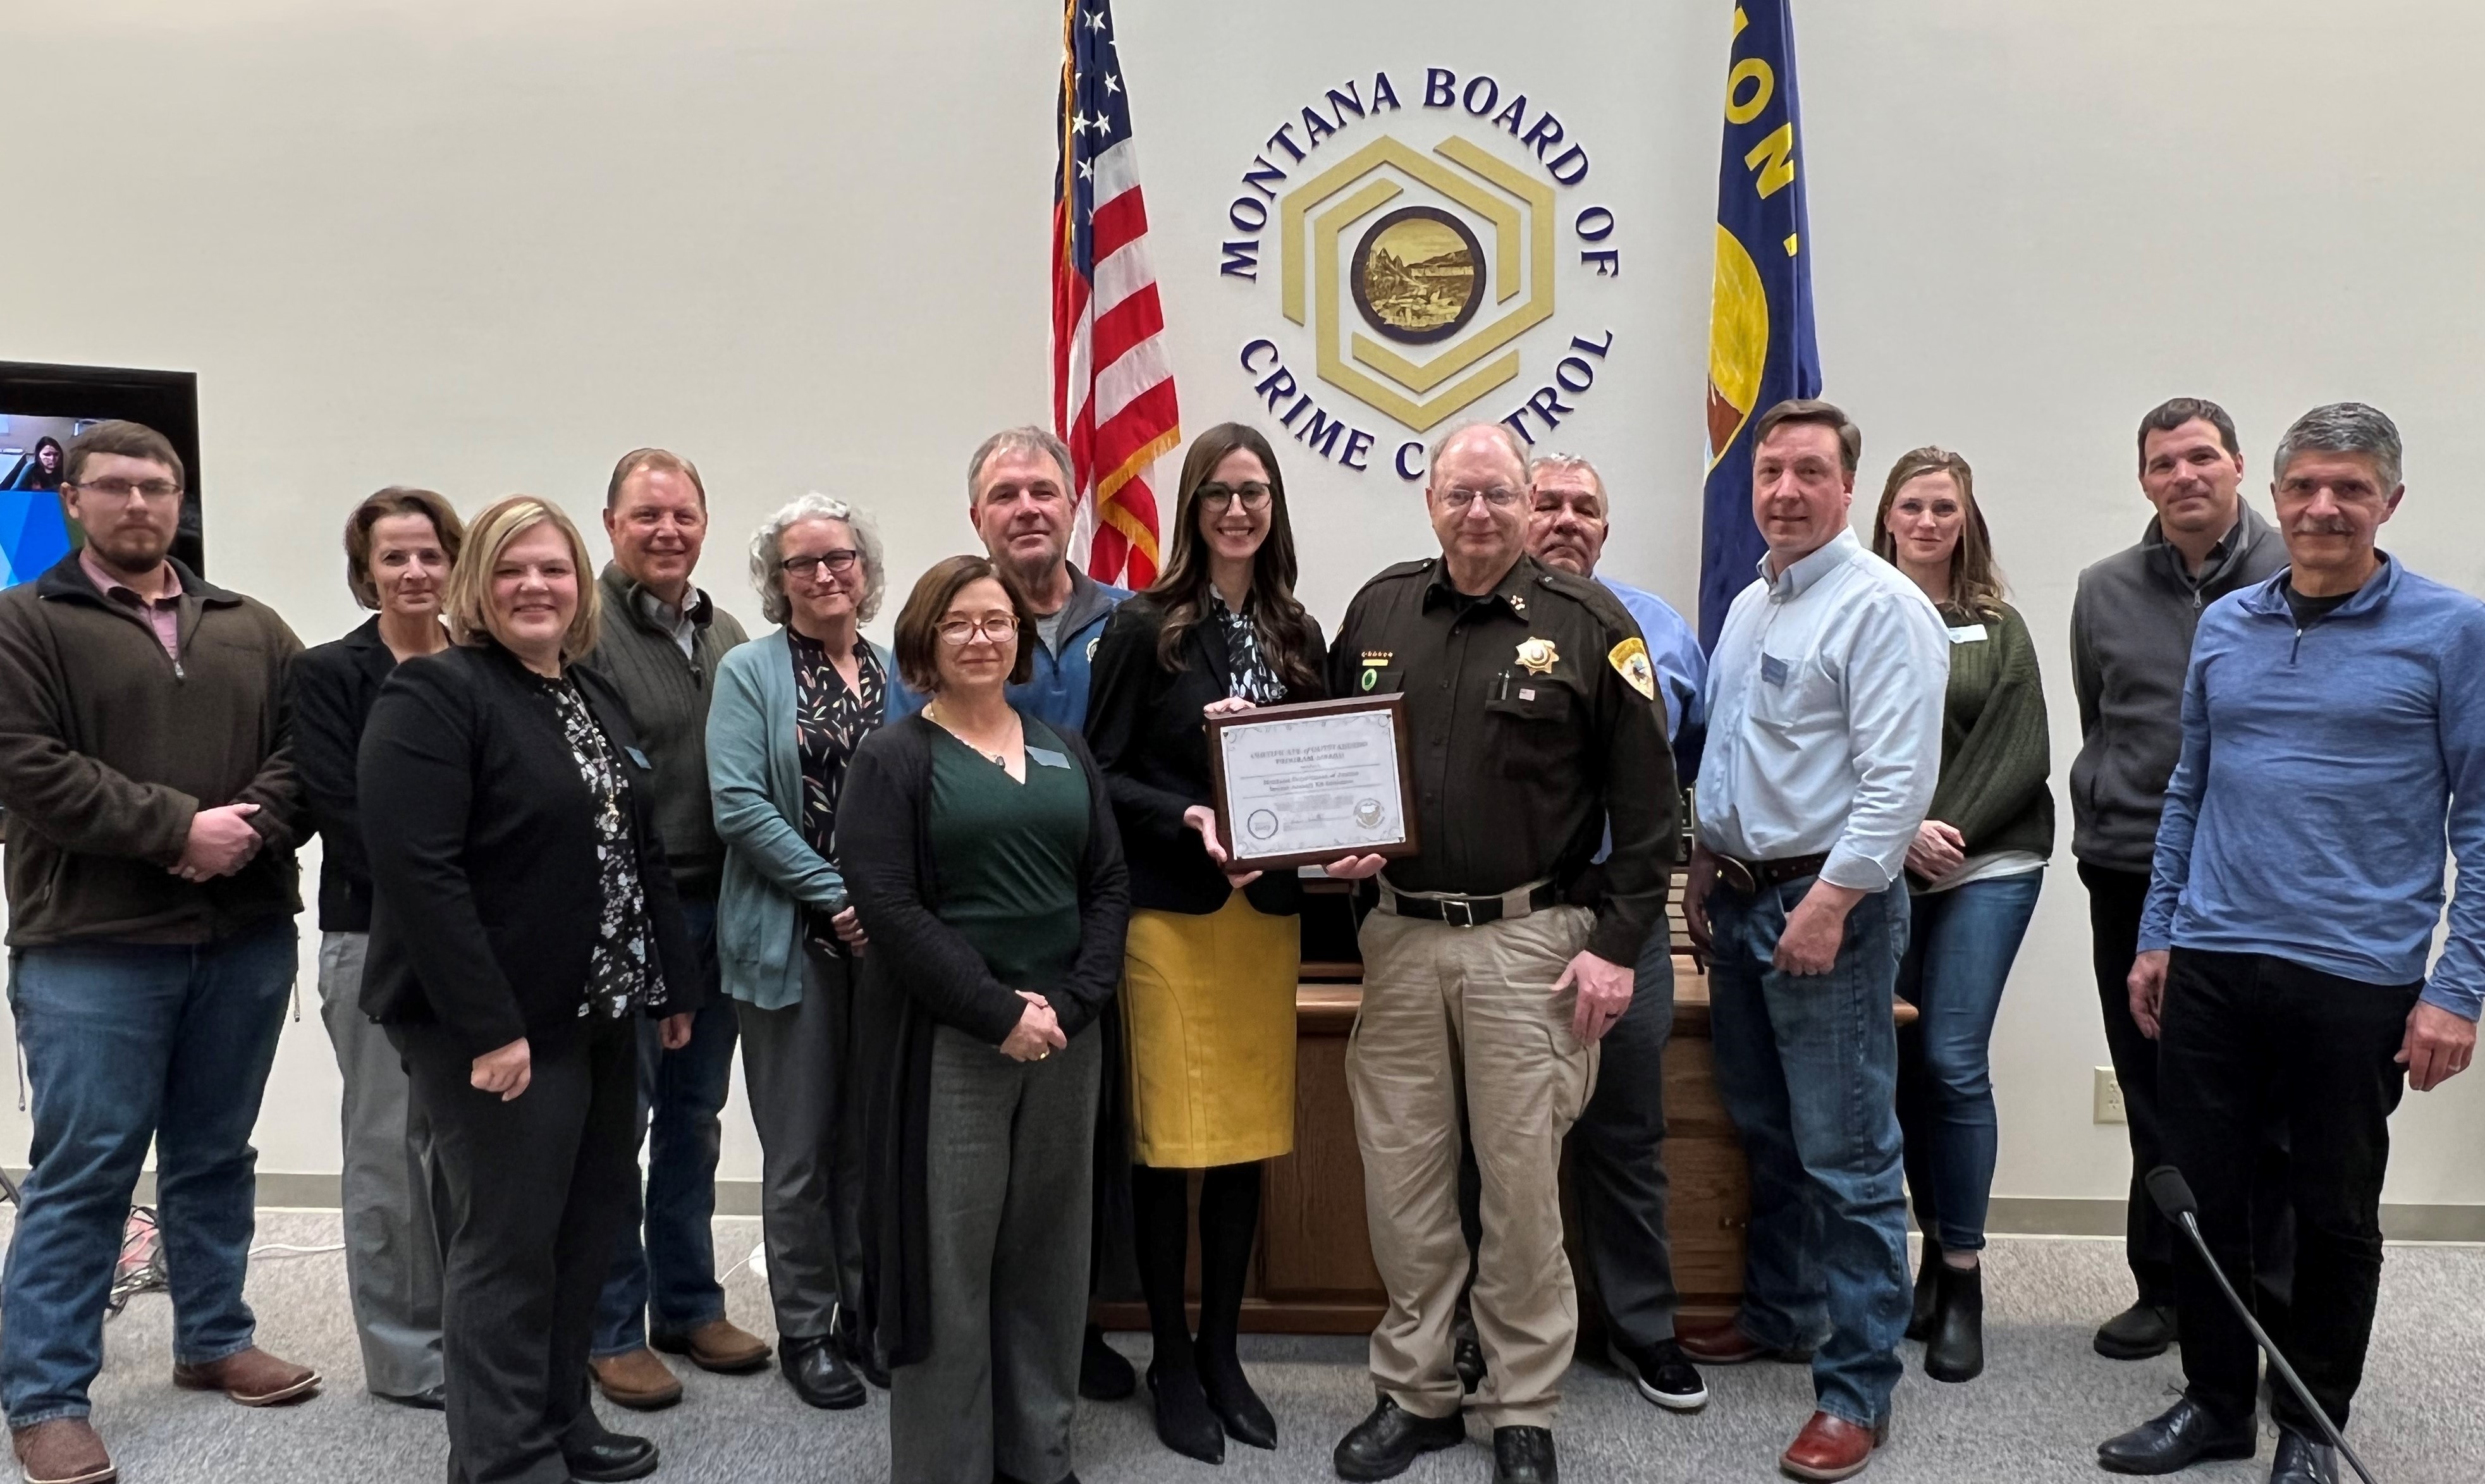 Kayla Bragg, Bryan Fischer, and Dana Toole from the Sexual Assault Services Initiative (SAKI) with the Montana Board of Crime Control at the March 2022 Board Meeting